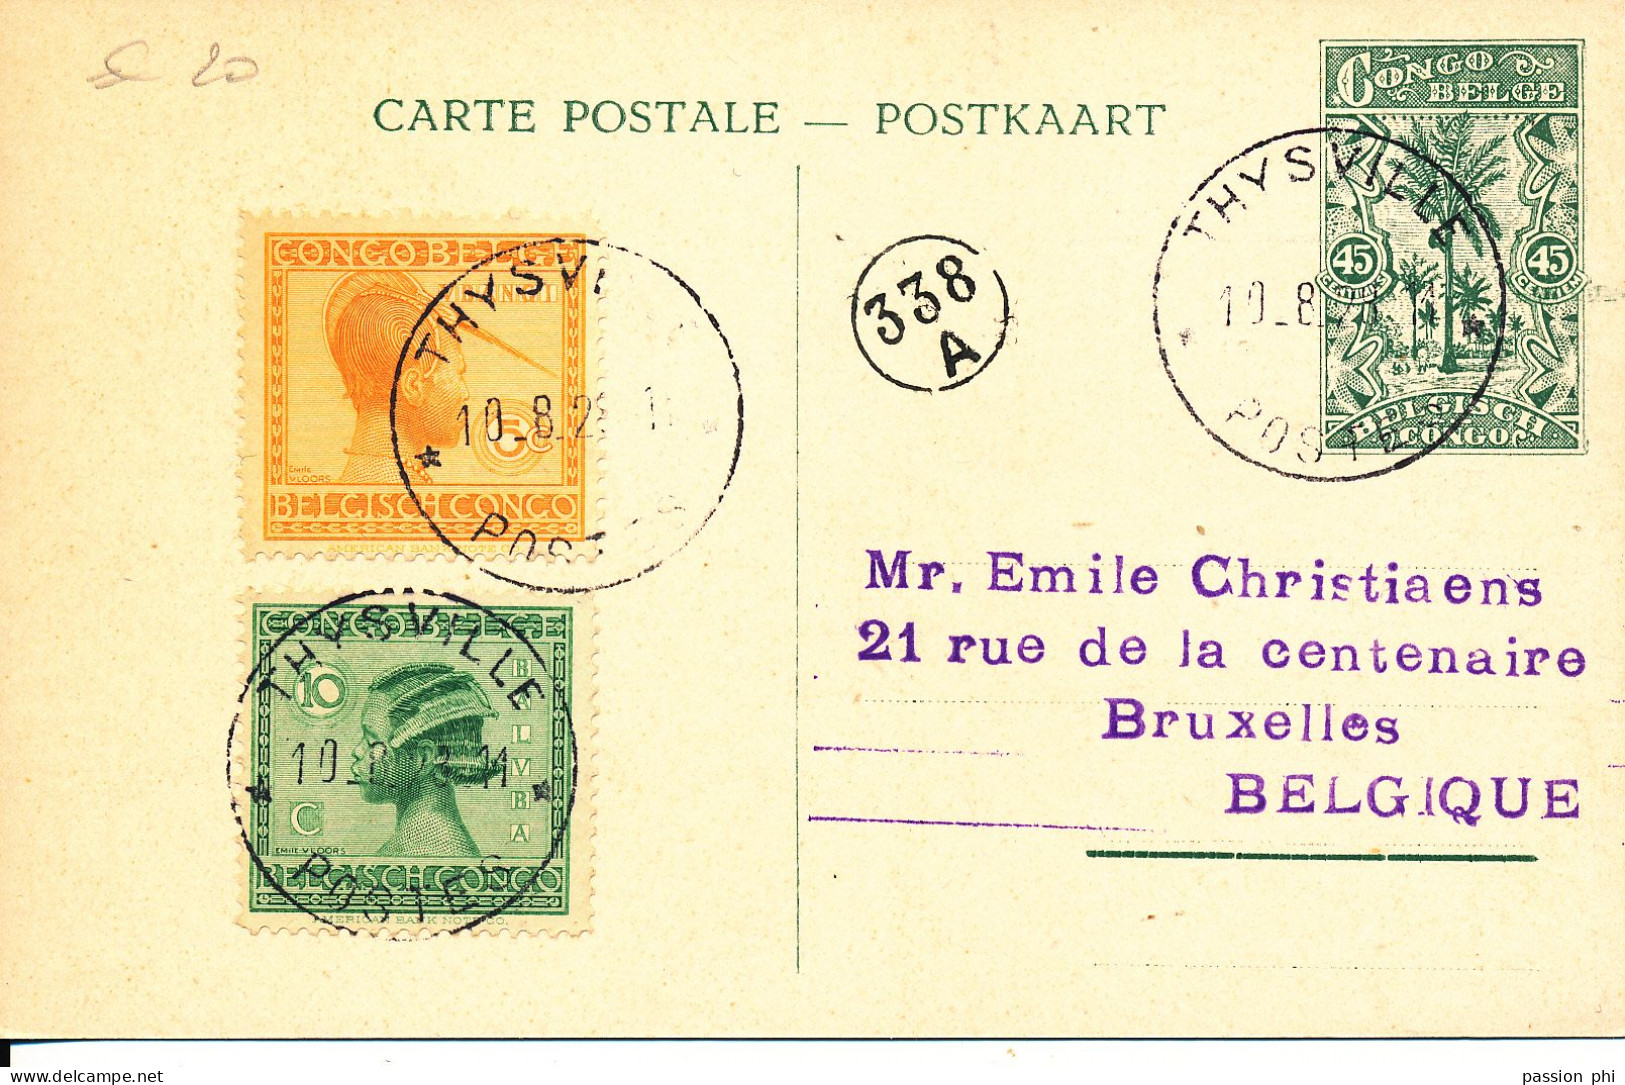 BELGIAN CONGO 1912 ISSUE PPS SBEP 66a VIEW 6 USED - Enteros Postales